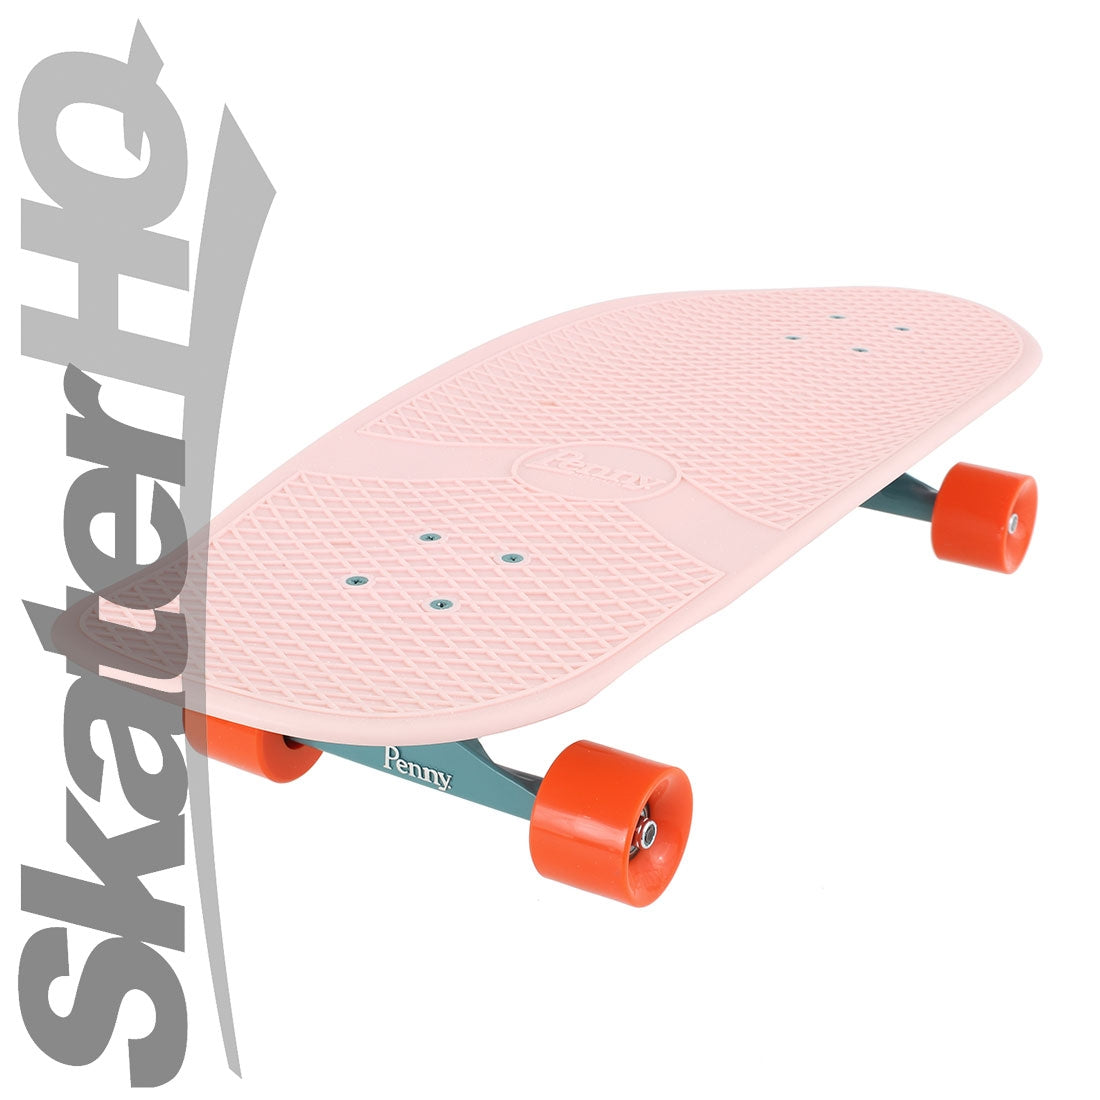 Penny 29 High-Line Complete - Cactus Wanderlust Skateboard Compl Carving and Specialty